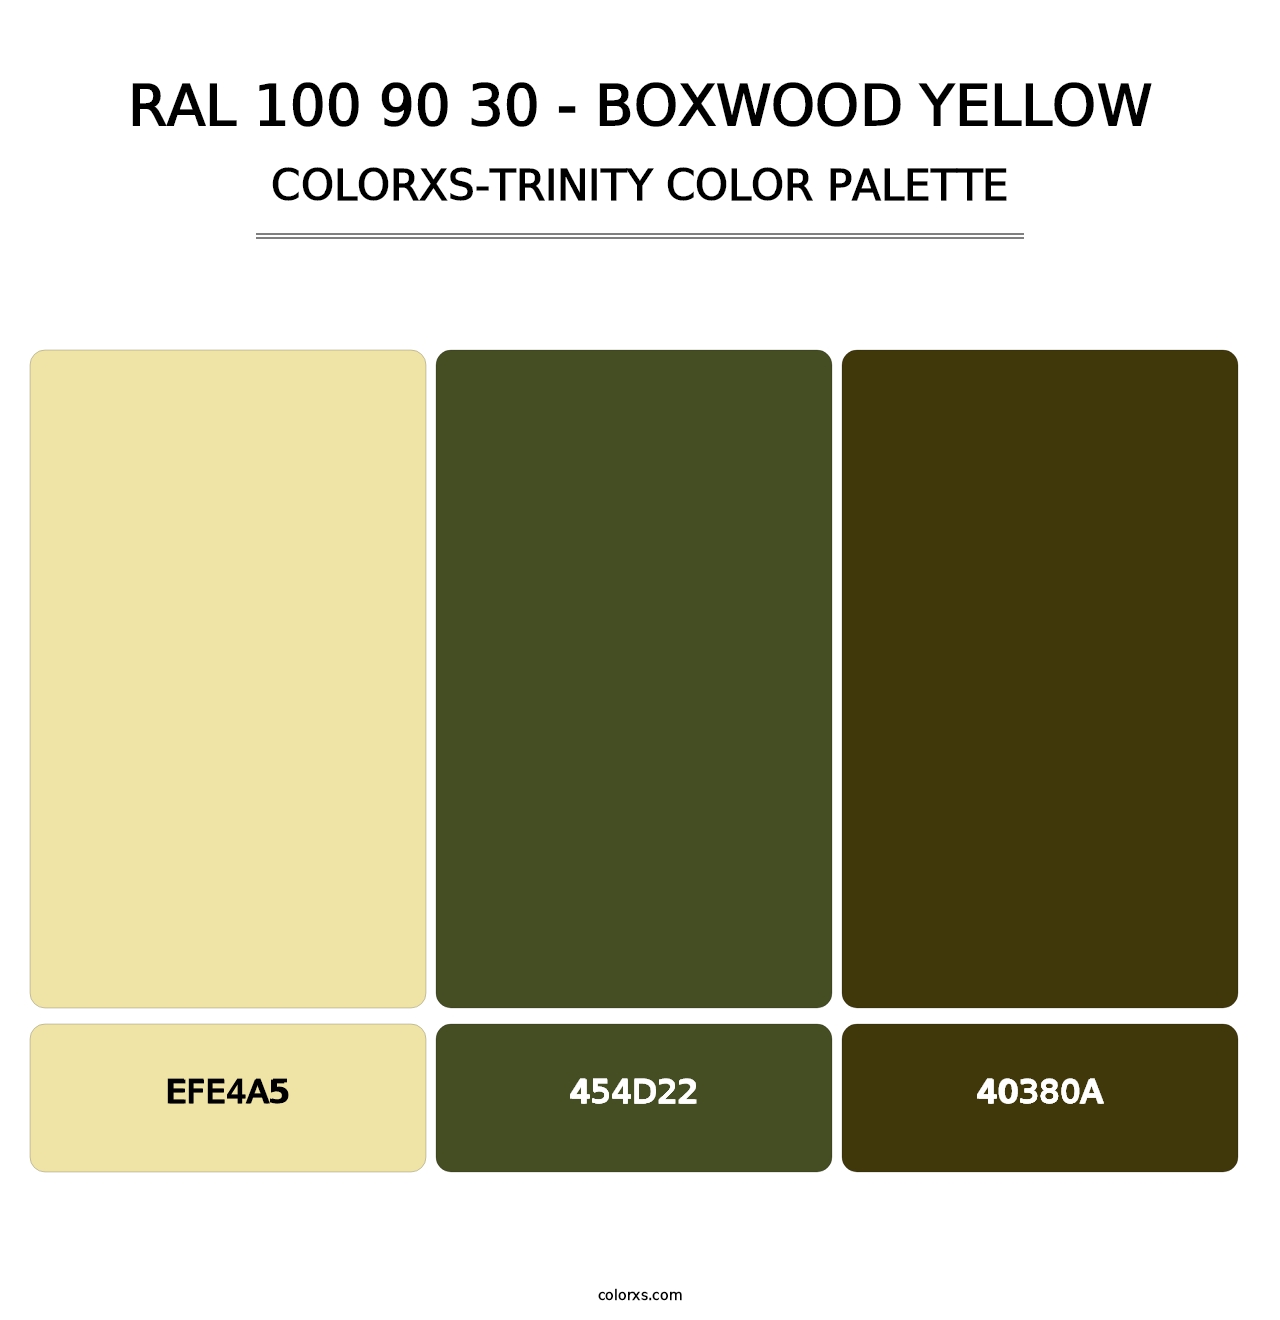 RAL 100 90 30 - Boxwood Yellow - Colorxs Trinity Palette